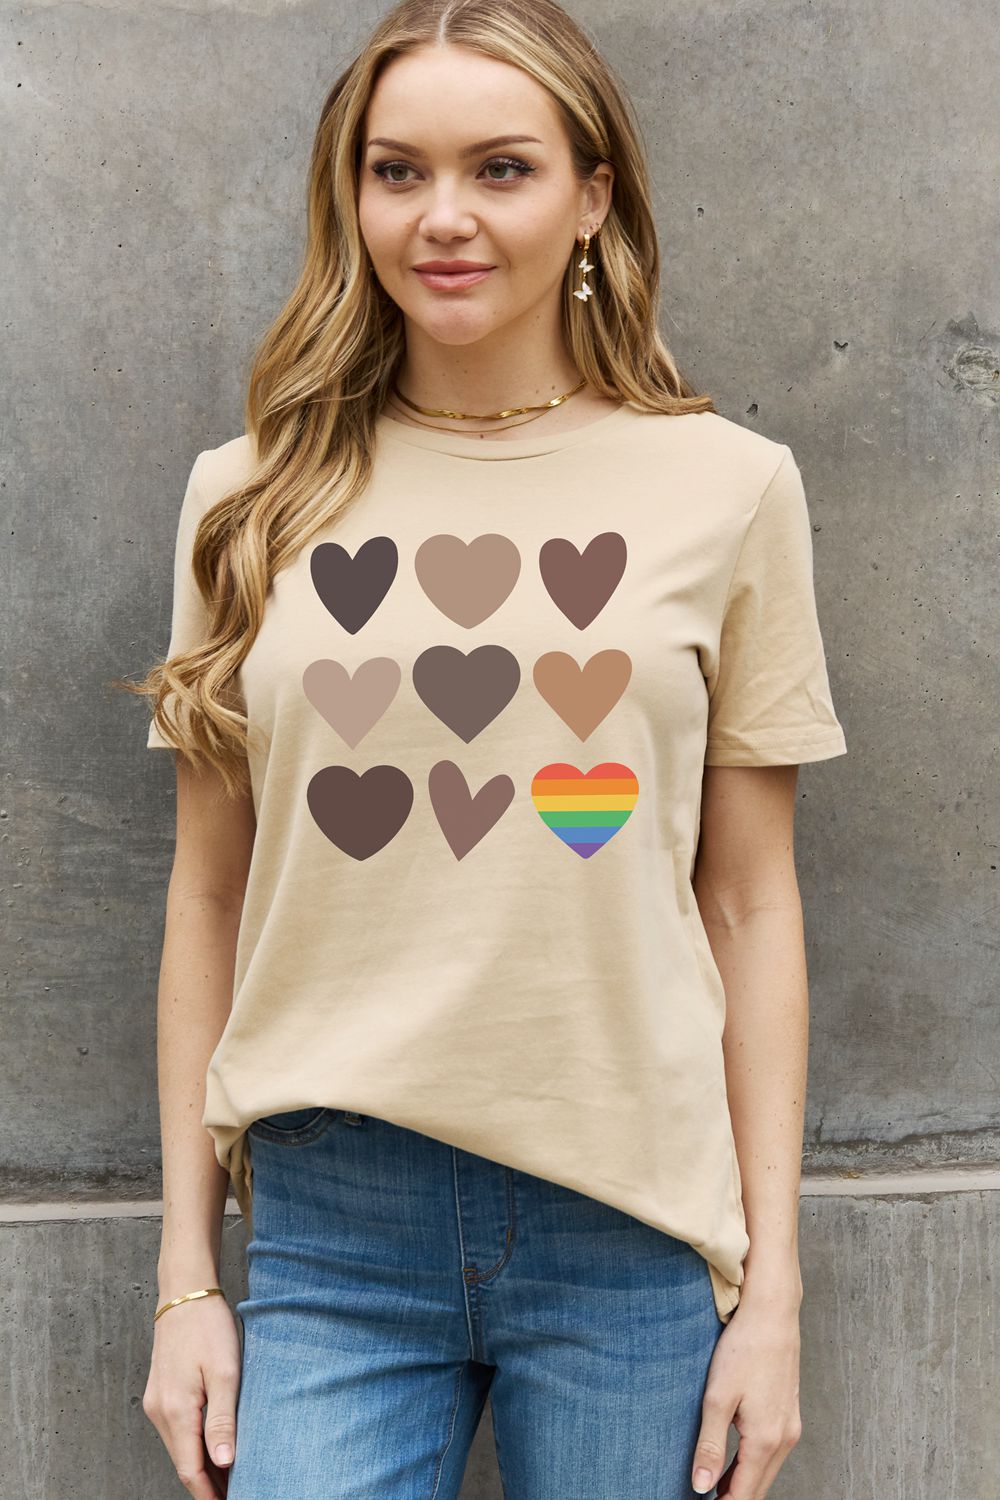 Full Size Heart Graphic Cotton Tee - Beige / S - T-Shirts - Shirts & Tops - 8 - 2024